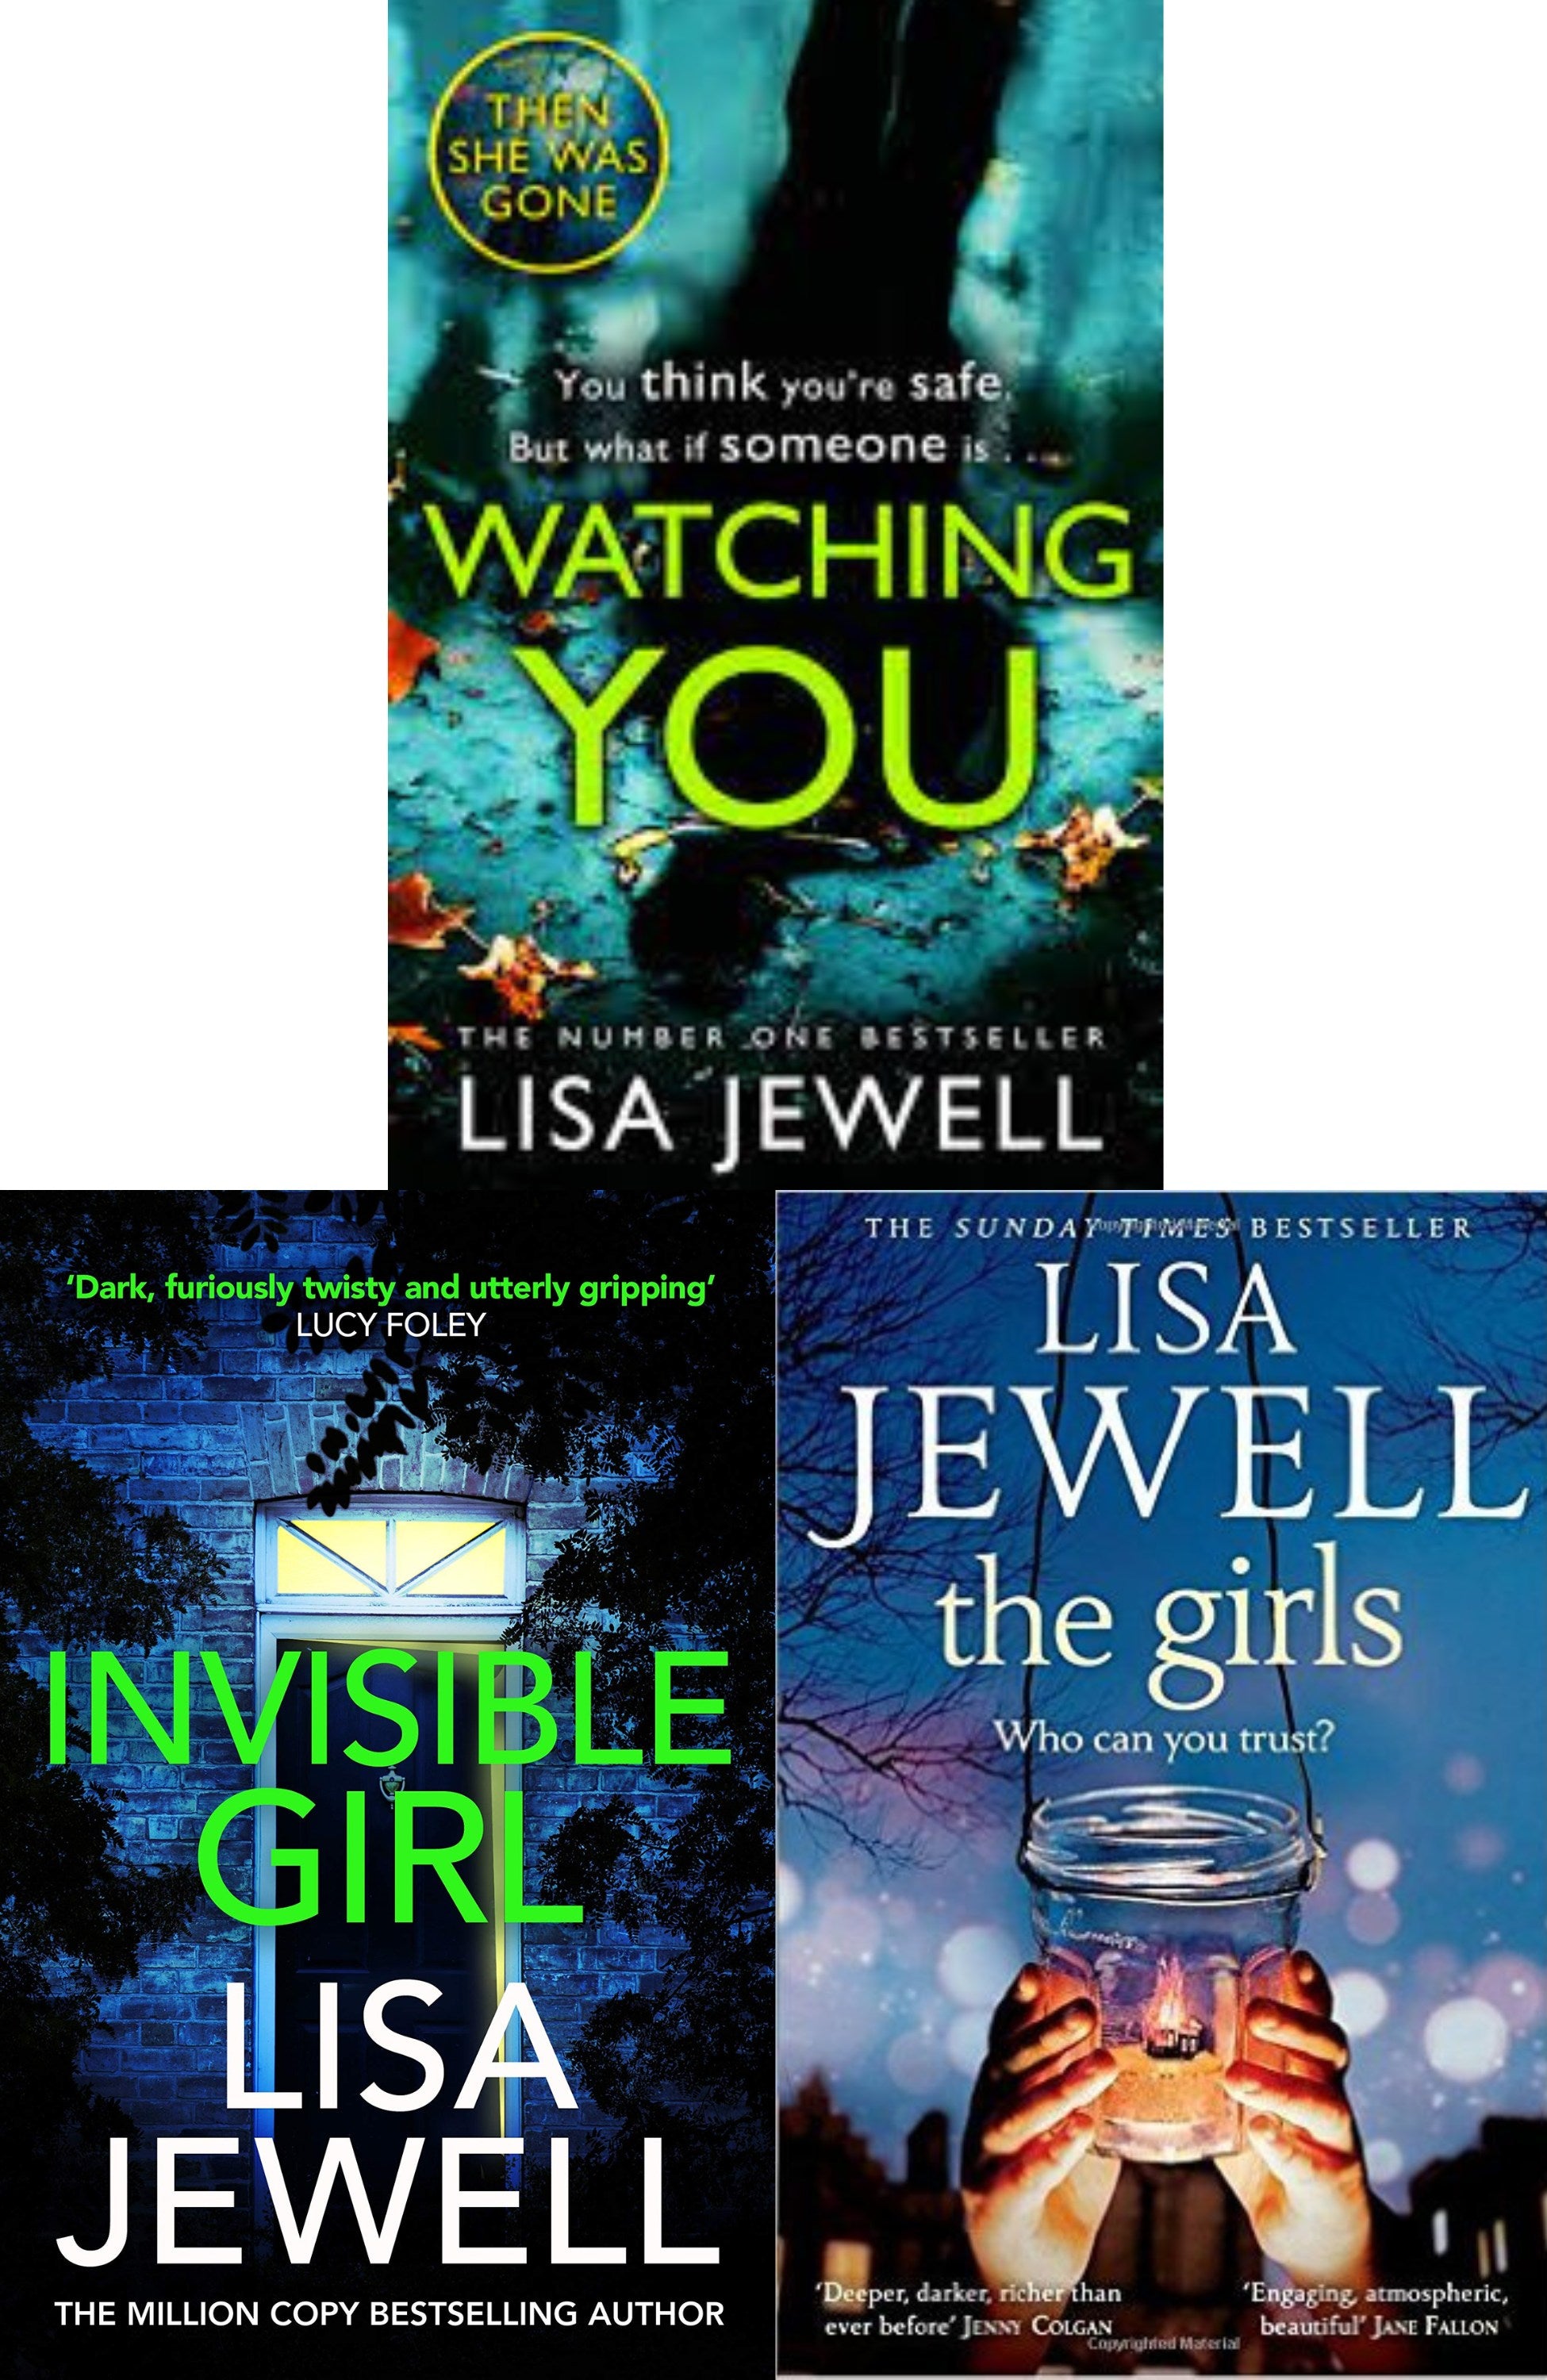 Lisa Jewell Bestseller Book Combo ( Invisible Girl, The Girls, Watching You )